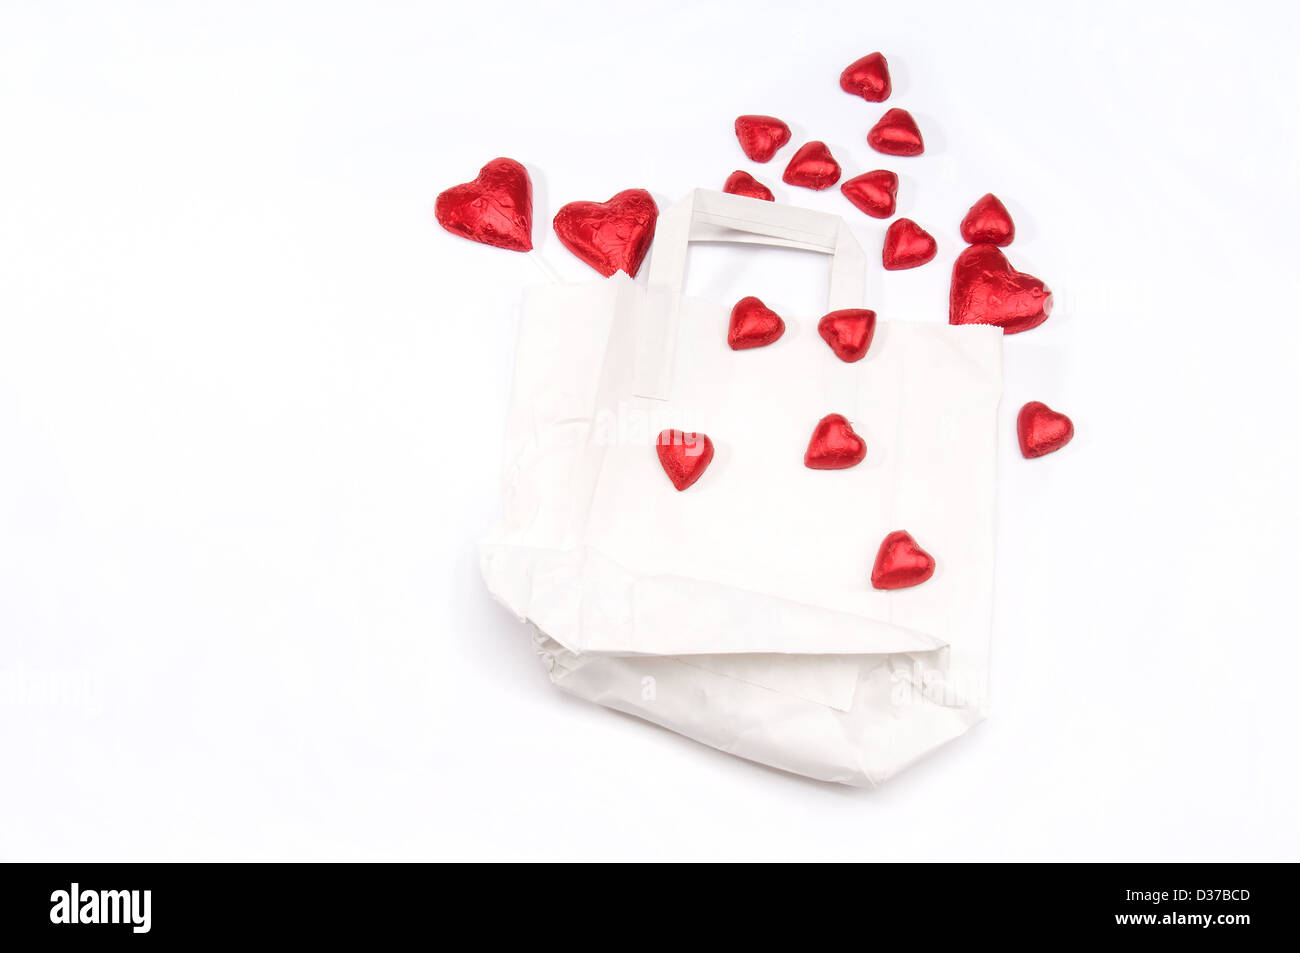 Red hearts scattered over a white paper Stock Photo